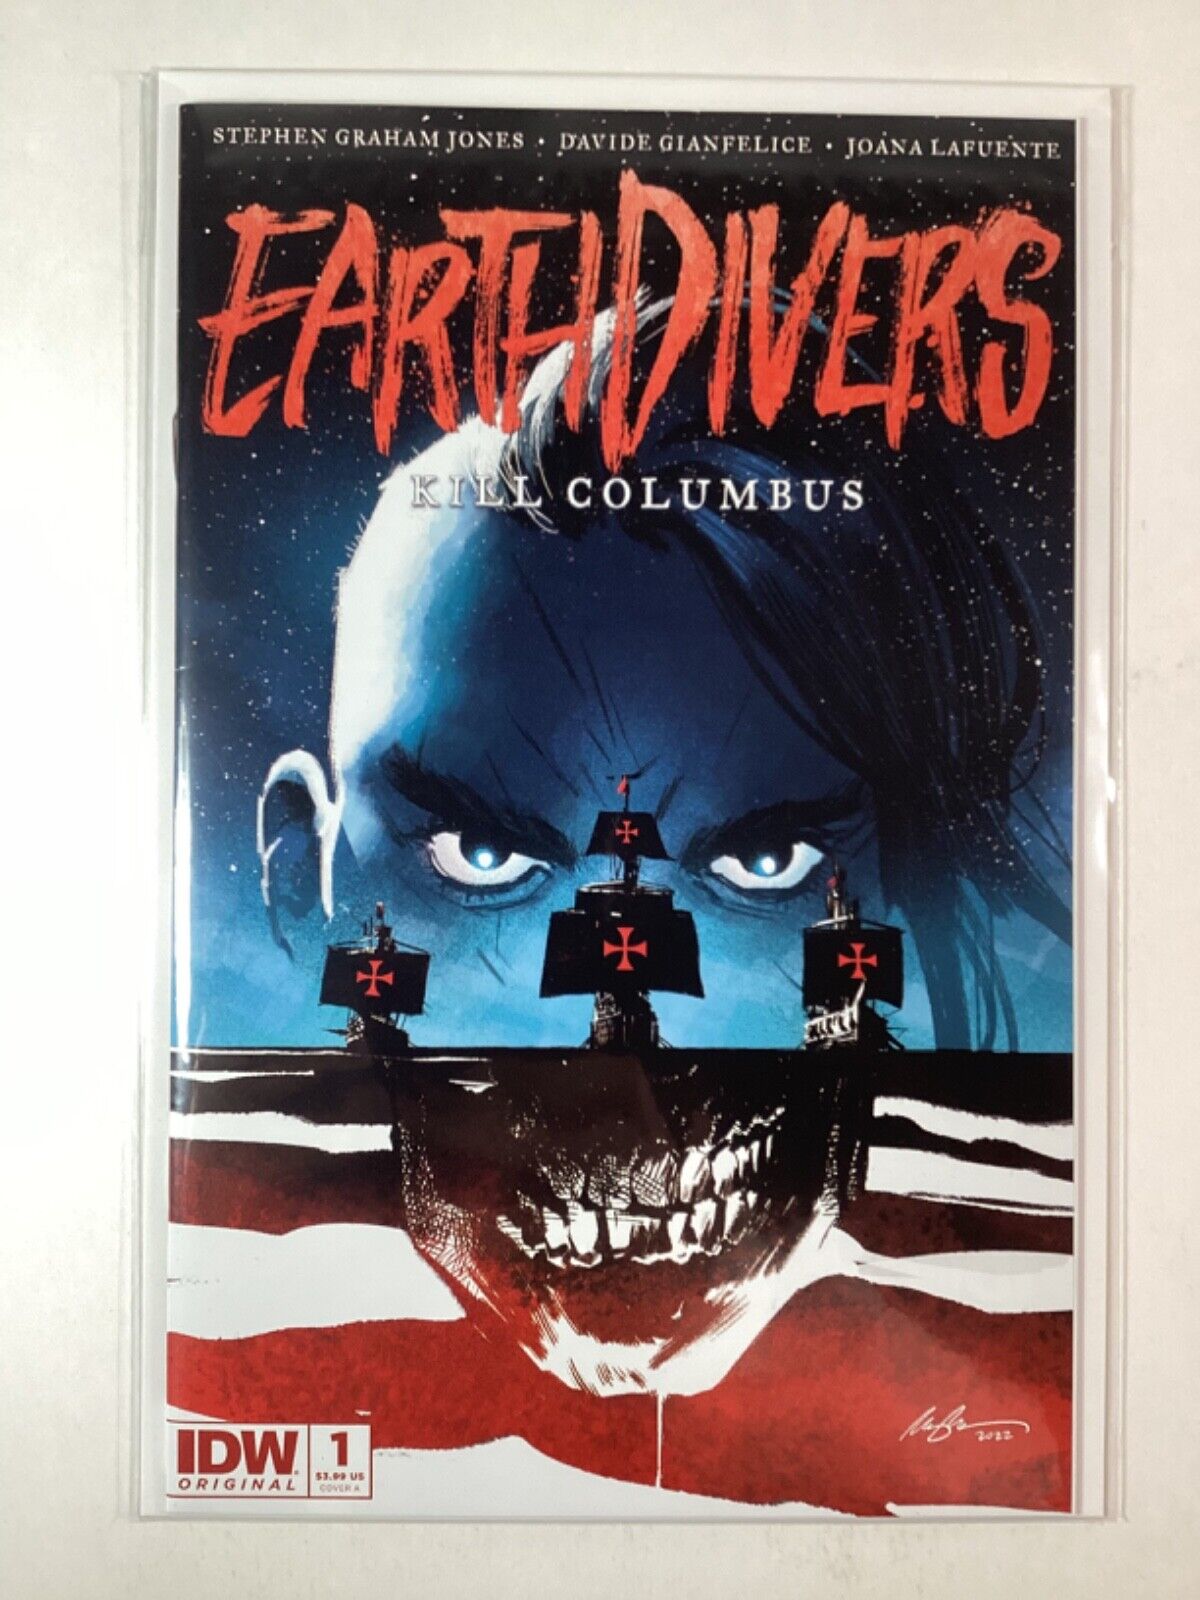 EARTHDIVERS (2022 IDW) #1A VF 8.0🥇FIRST PREMIERE ISSUE🥇DAVIDE GIANFELICE ART